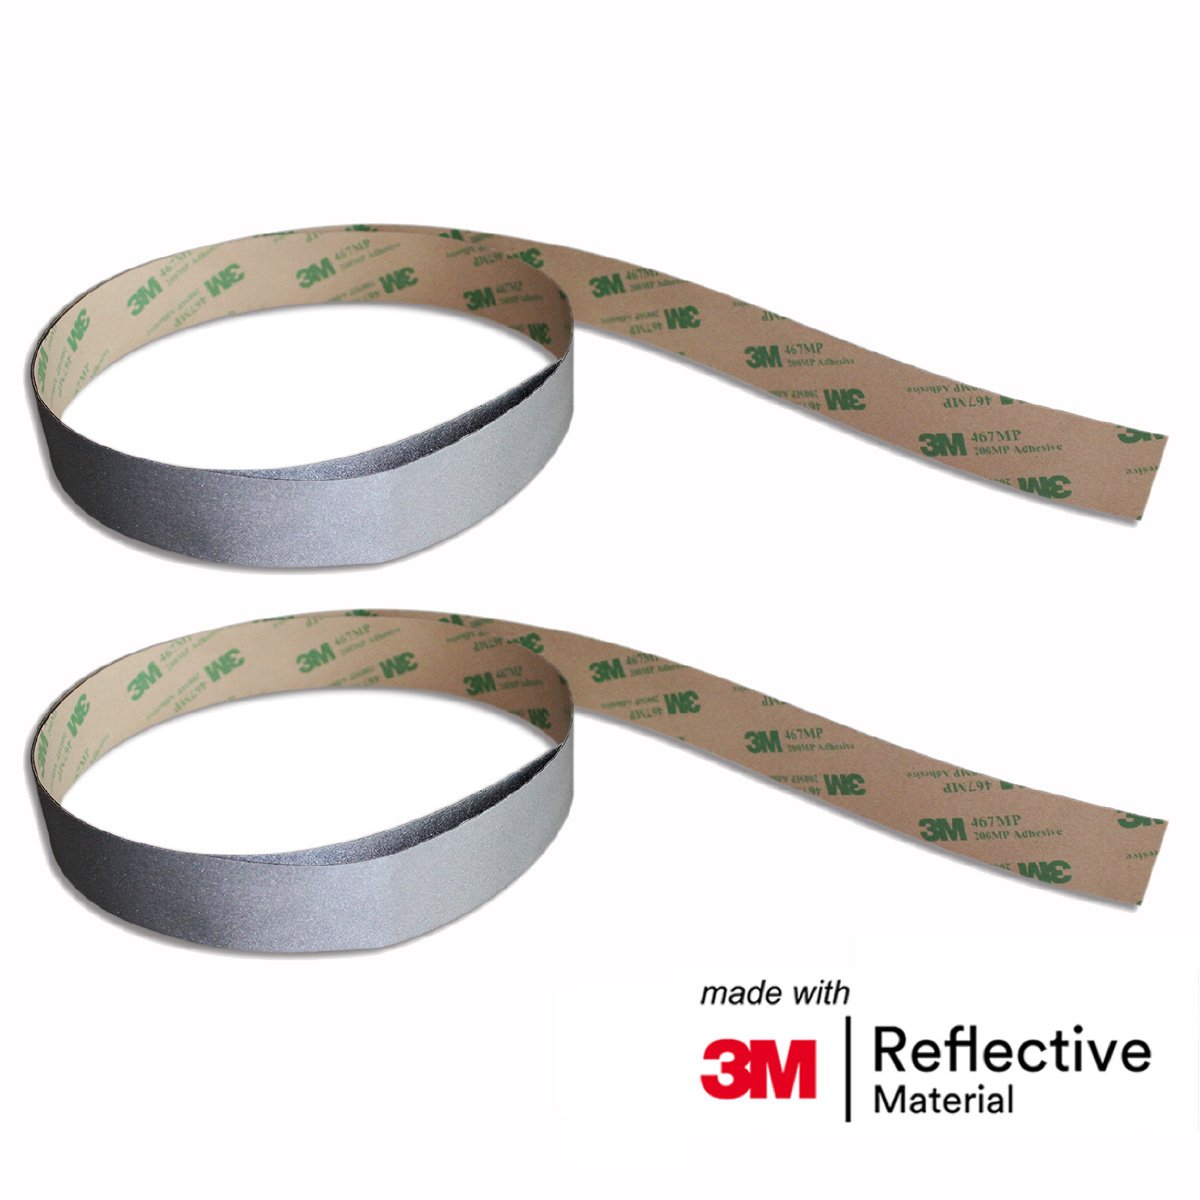 Two rolls of reflective tape